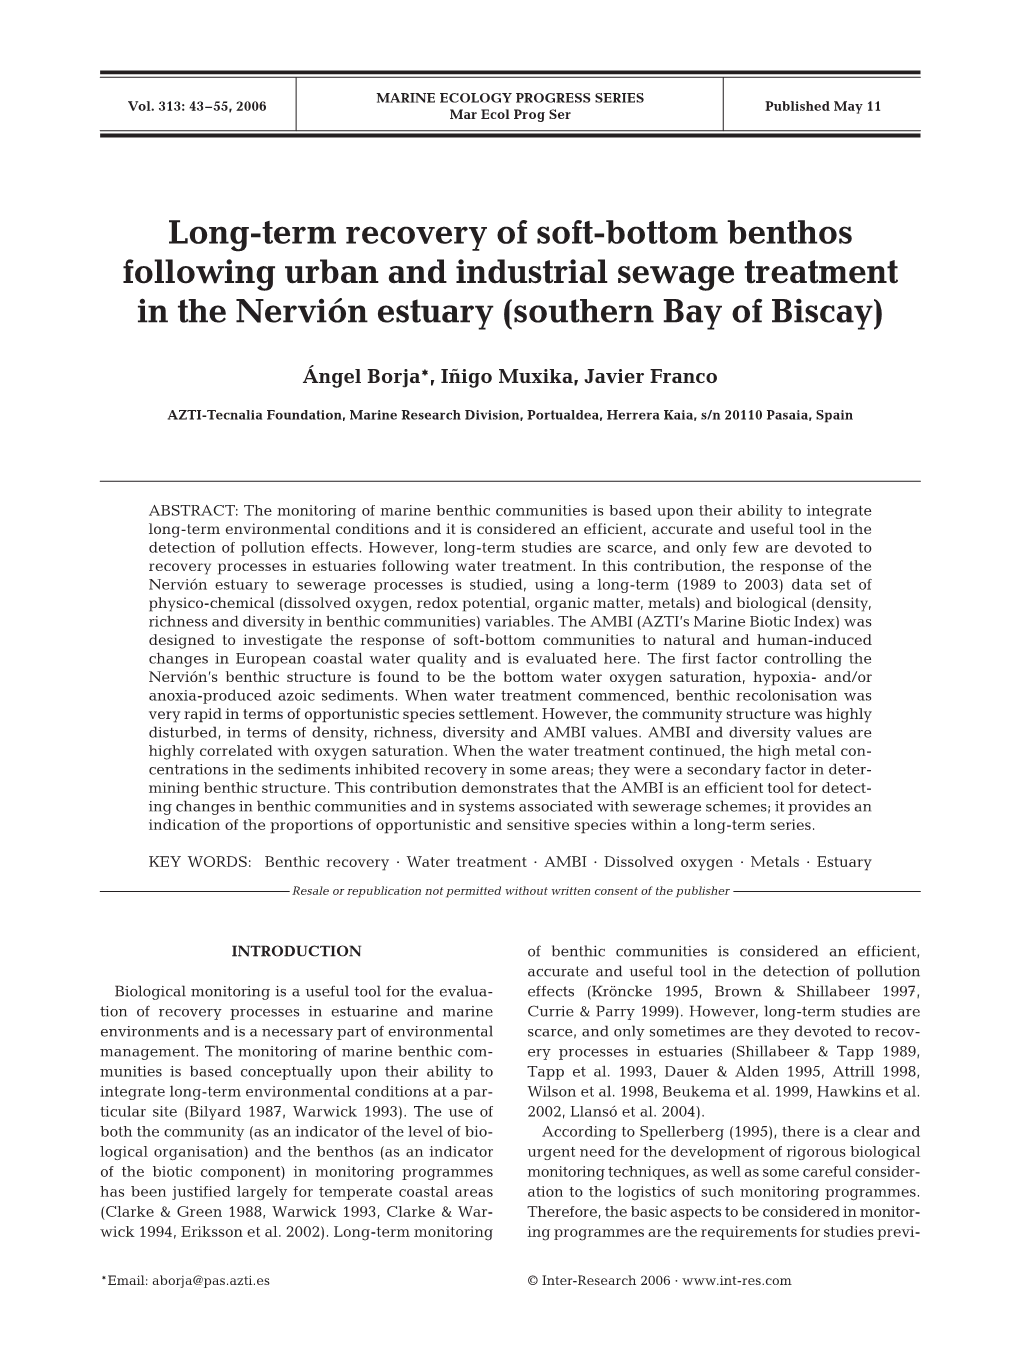 Long-Term Recovery of Soft-Bottom Benthos Following Urban and Industrial Sewage Treatment in the Nervión Estuary (Southern Bay of Biscay)